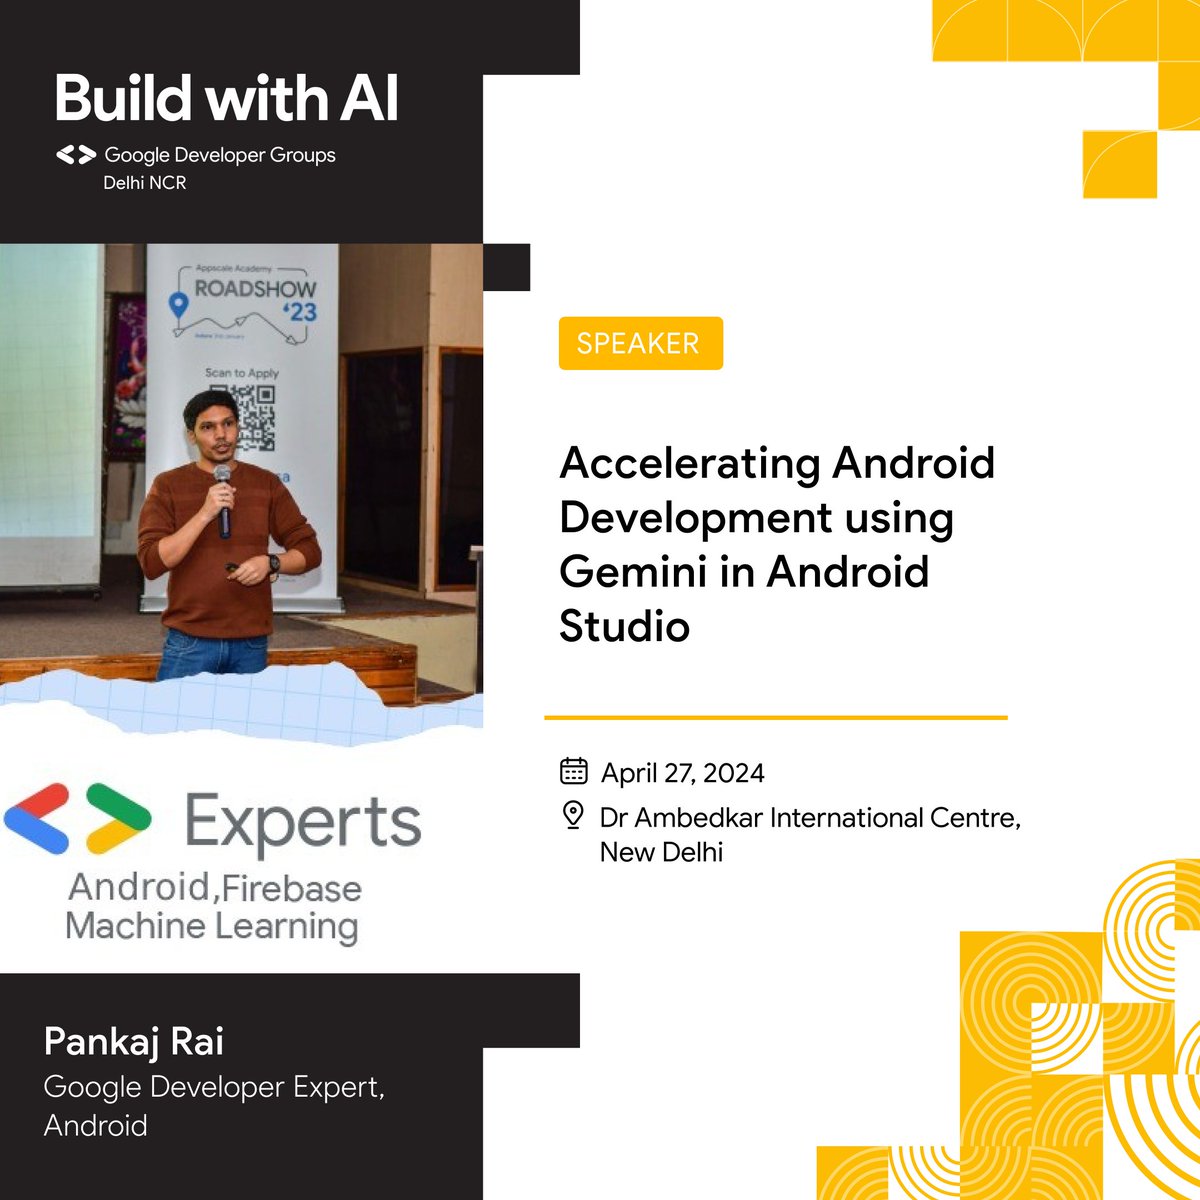 Pankaj Rai - Accelerating Android Dev with Gemini: What's up, Android devs? 💻 You ready to have your minds blown into the stratosphere? Pankaj Rai, a bonafide Google Developer Expert, is coming in hot with a session on how to supercharge your app-building game using Gemini